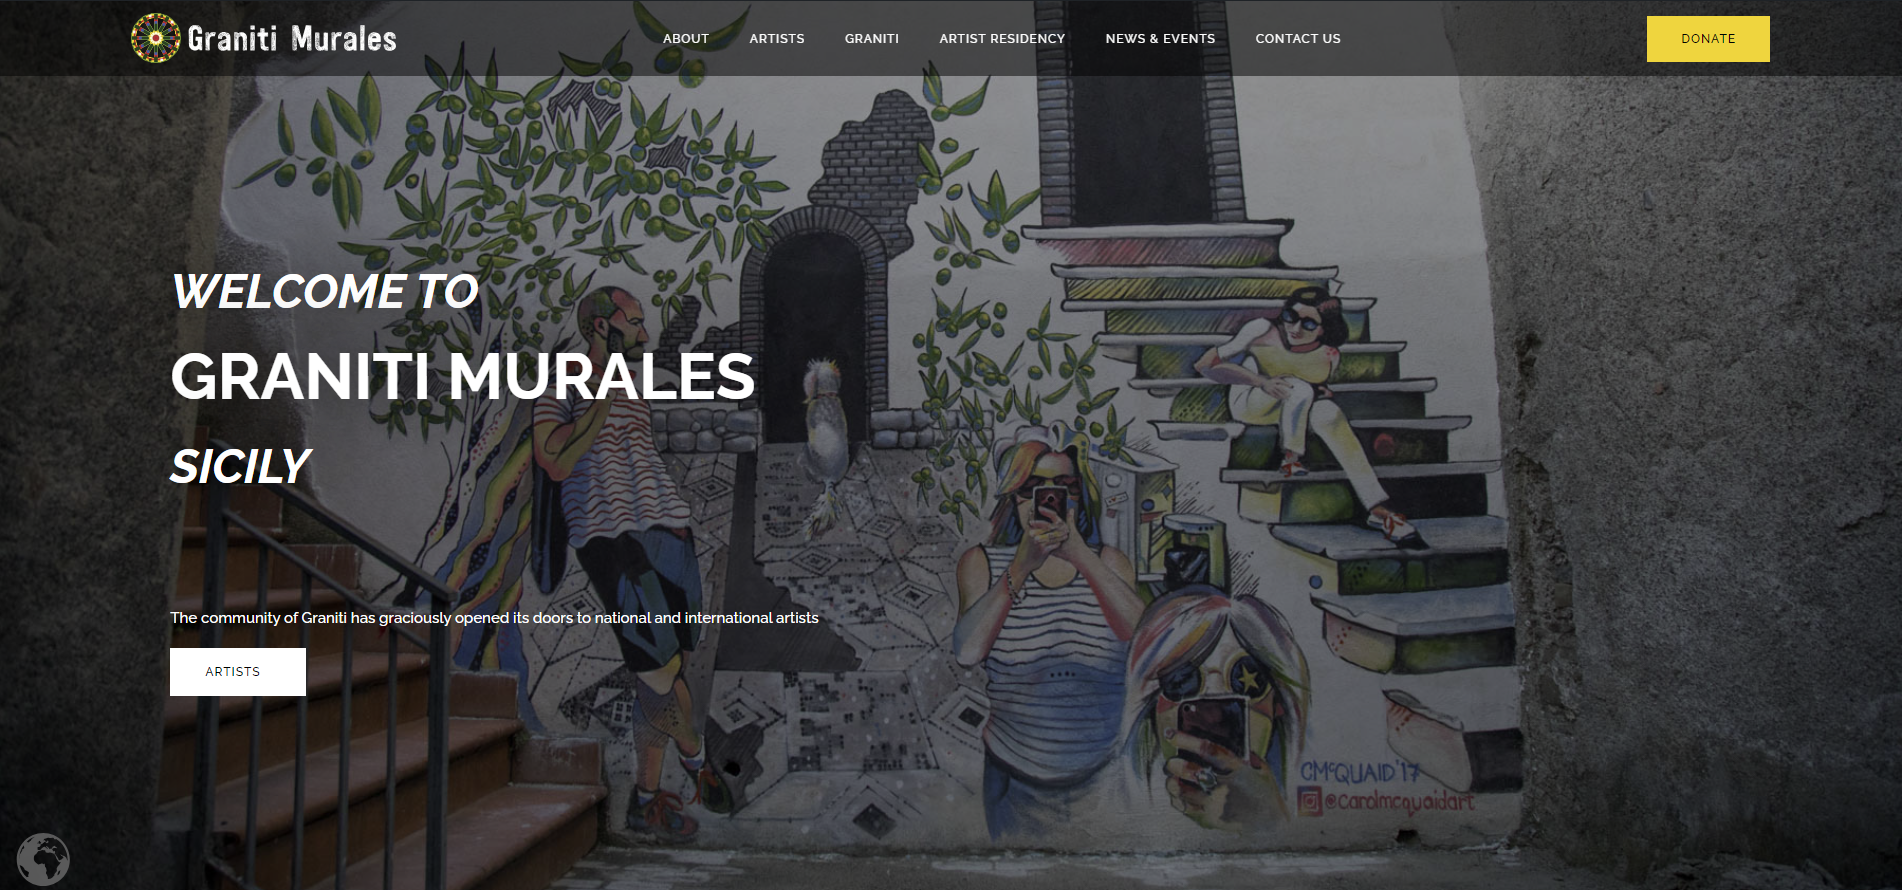 designing and building the captivating website for Graniti Murales